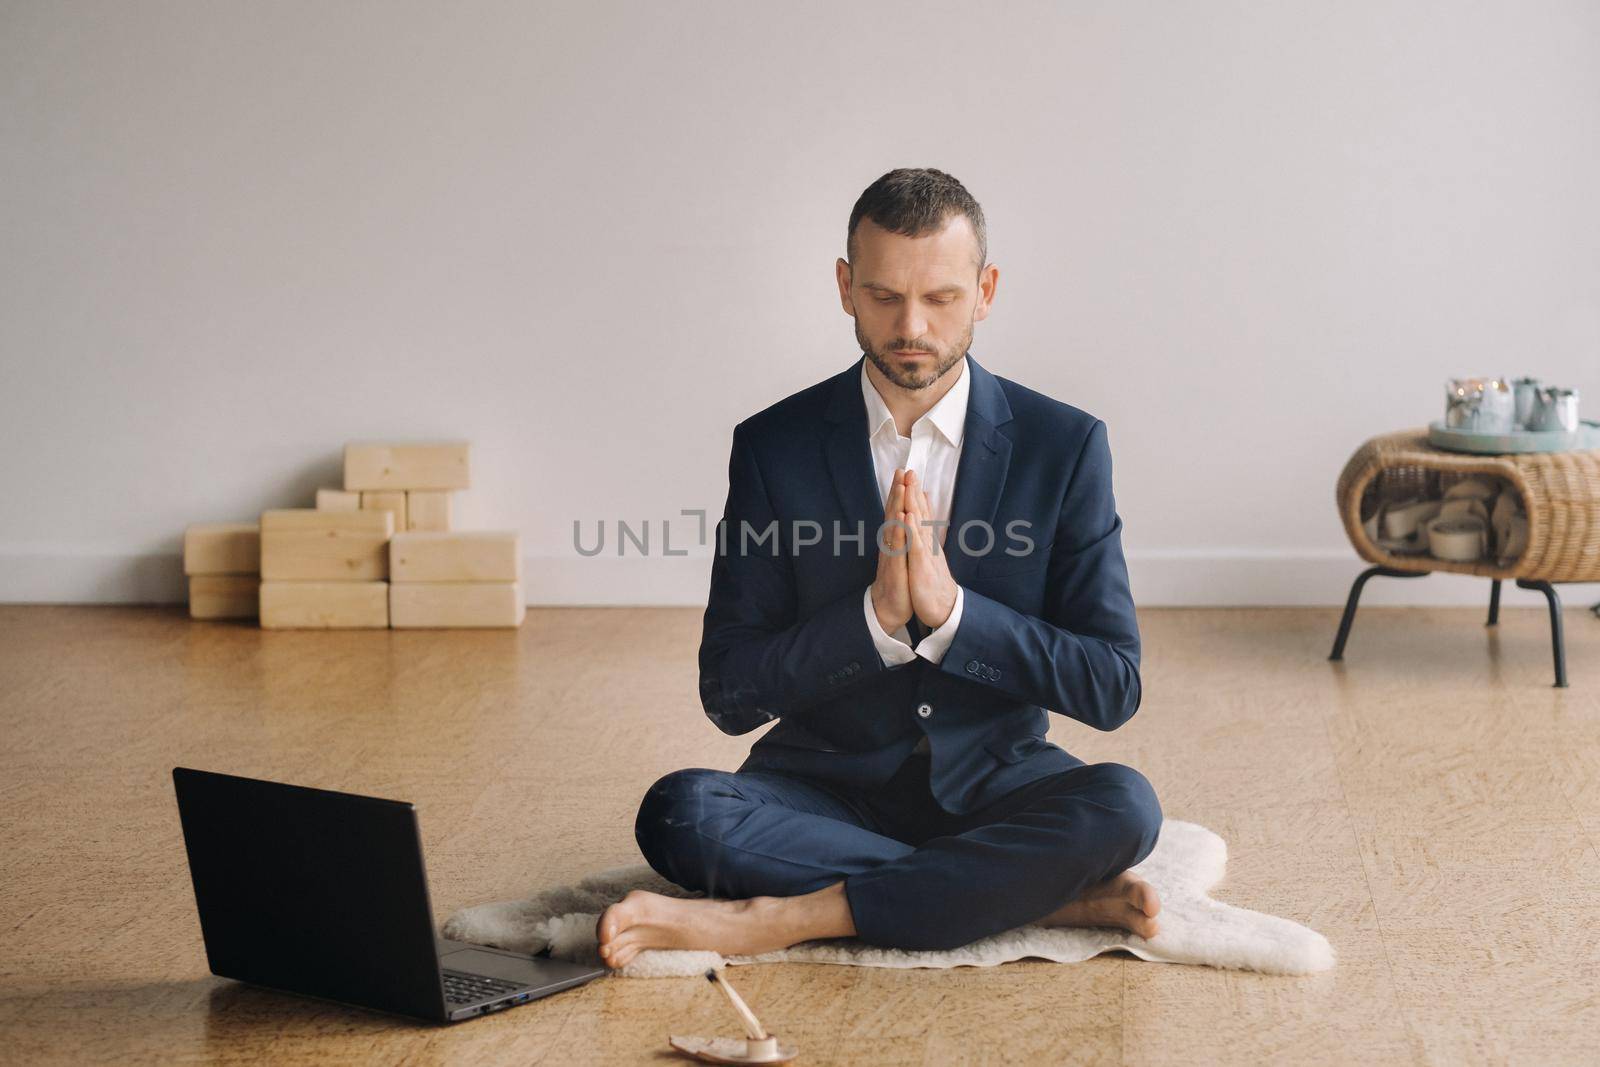 A man in a formal suit meditates while sitting in a fitness room with a laptop.